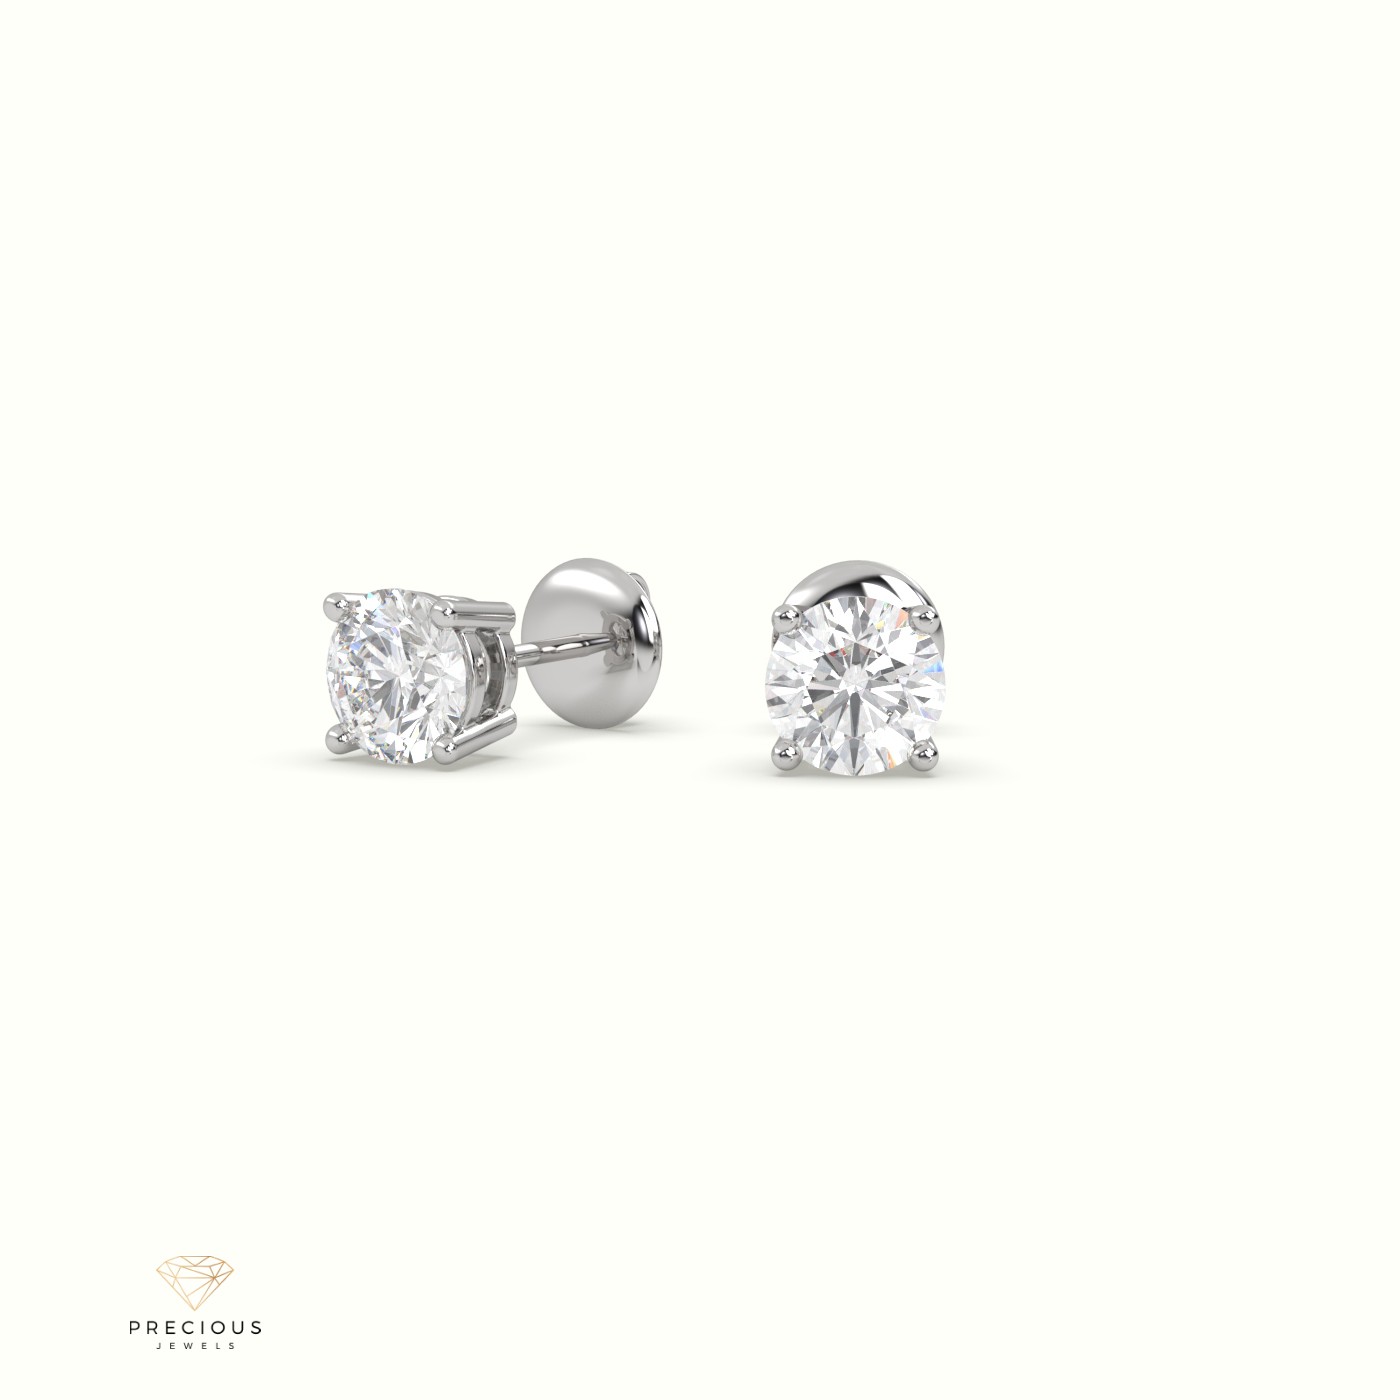 18k white gold 4 prongs classic round diamond earring studs Photos & images